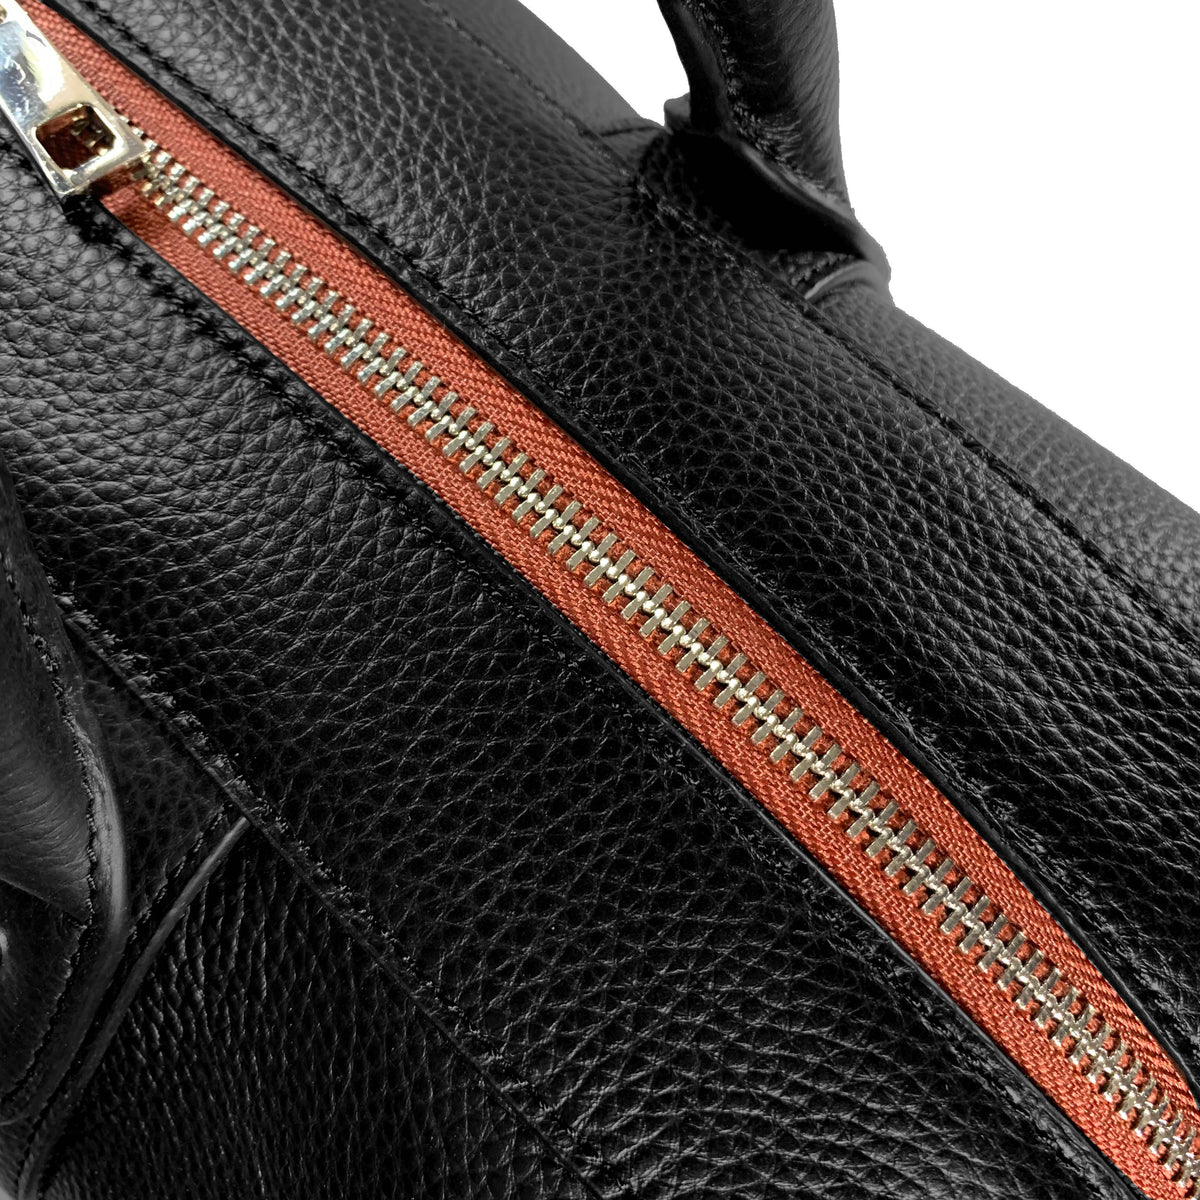 GRAND Leather Duffel Bag – christopher straub collection